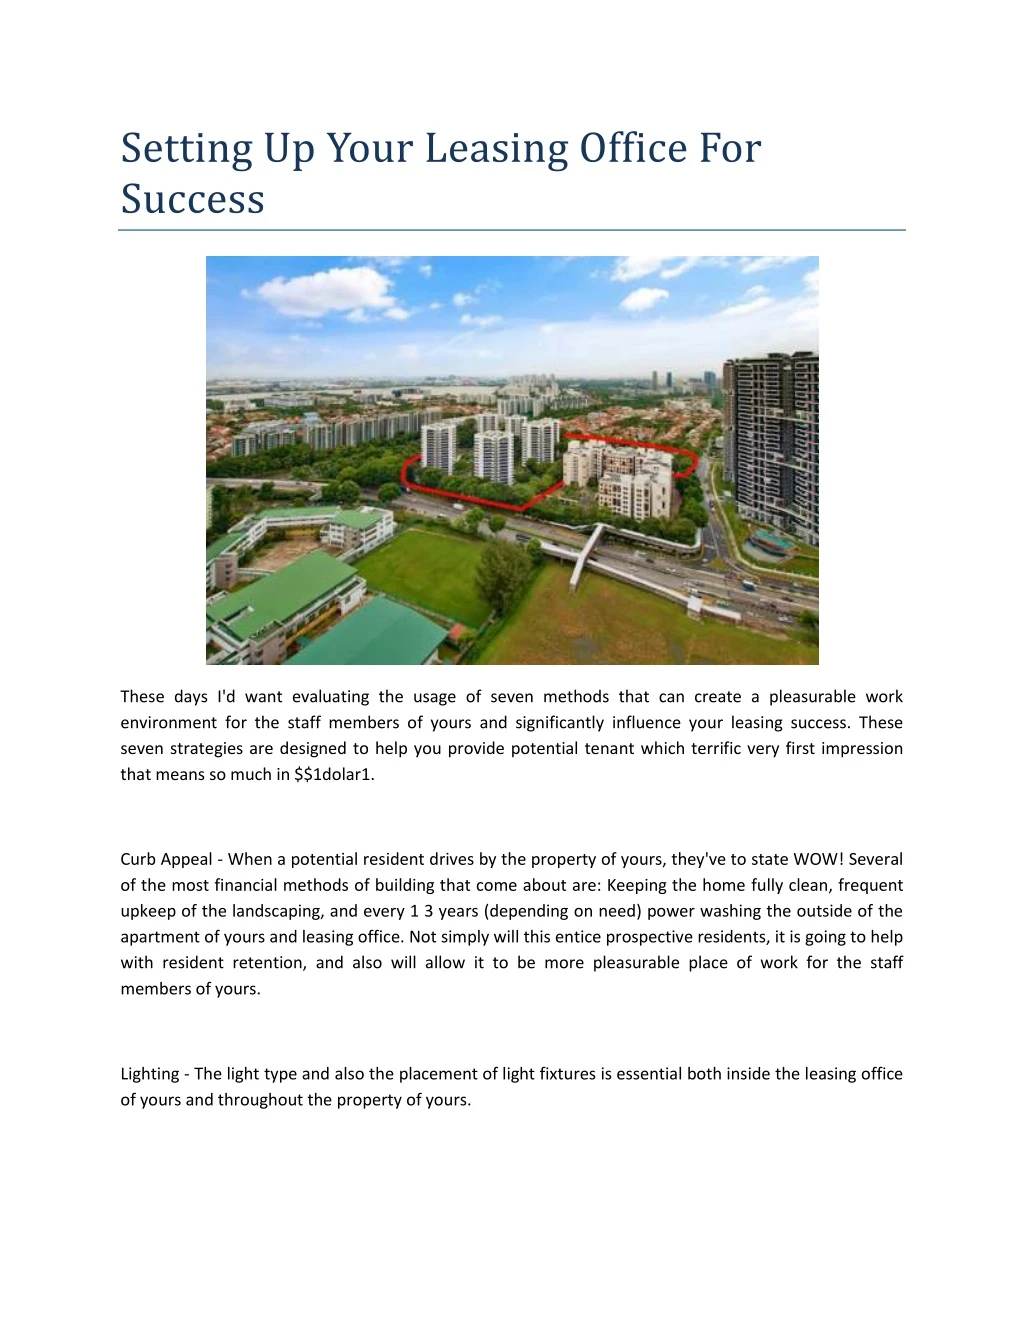 setting up your leasing office for success